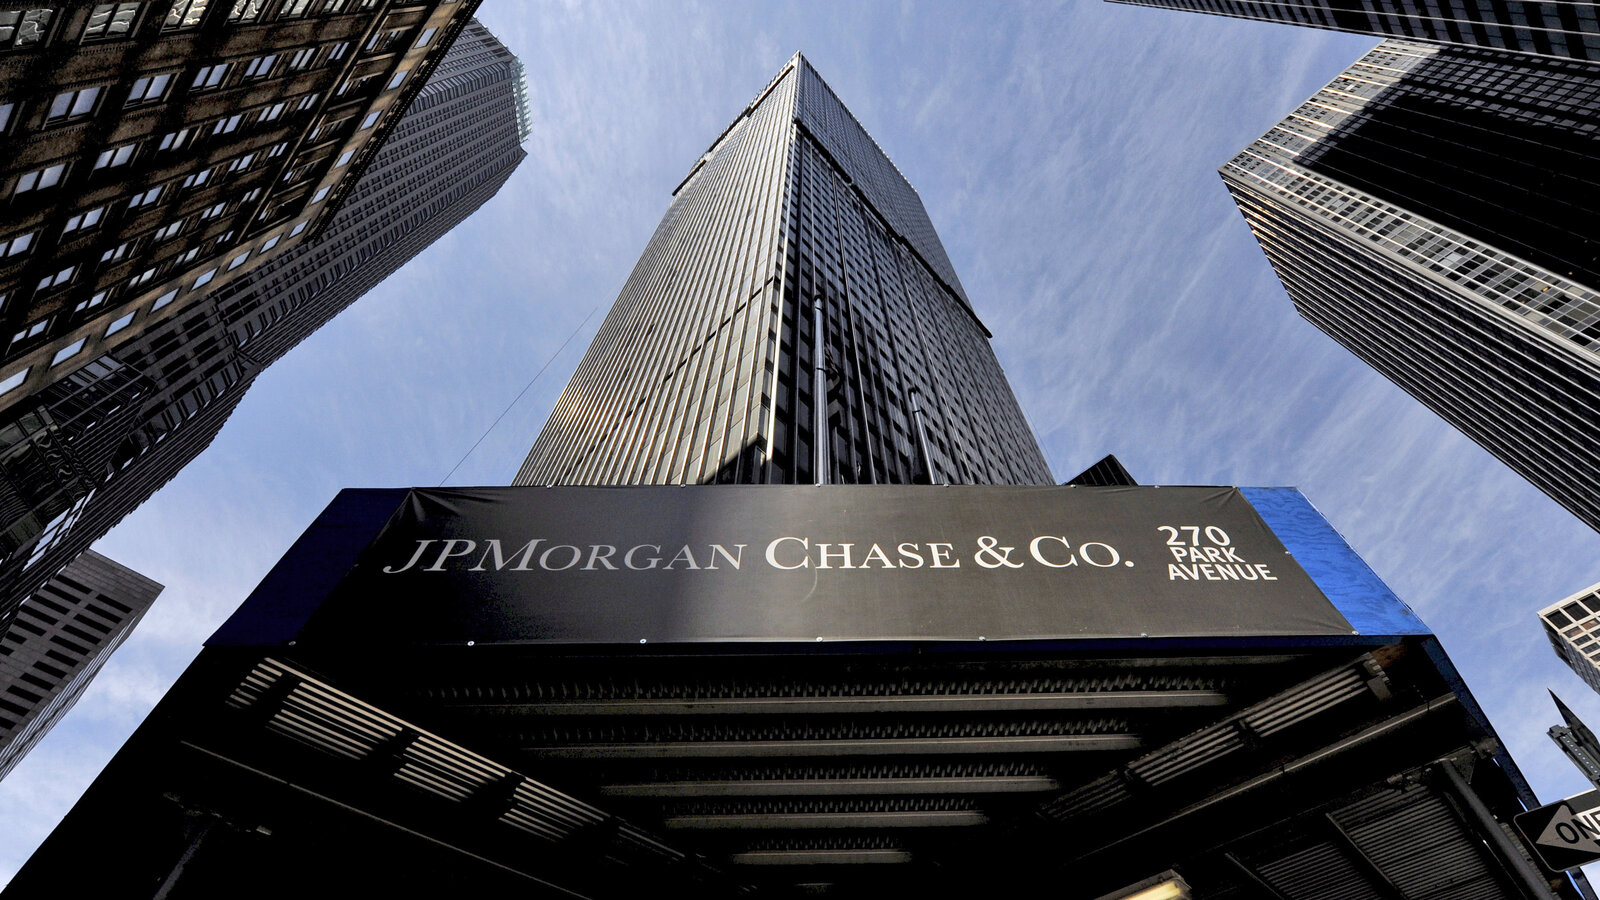 JPMorgan Chase pledges to improve working conditions, and this time it hopes the changes will stick